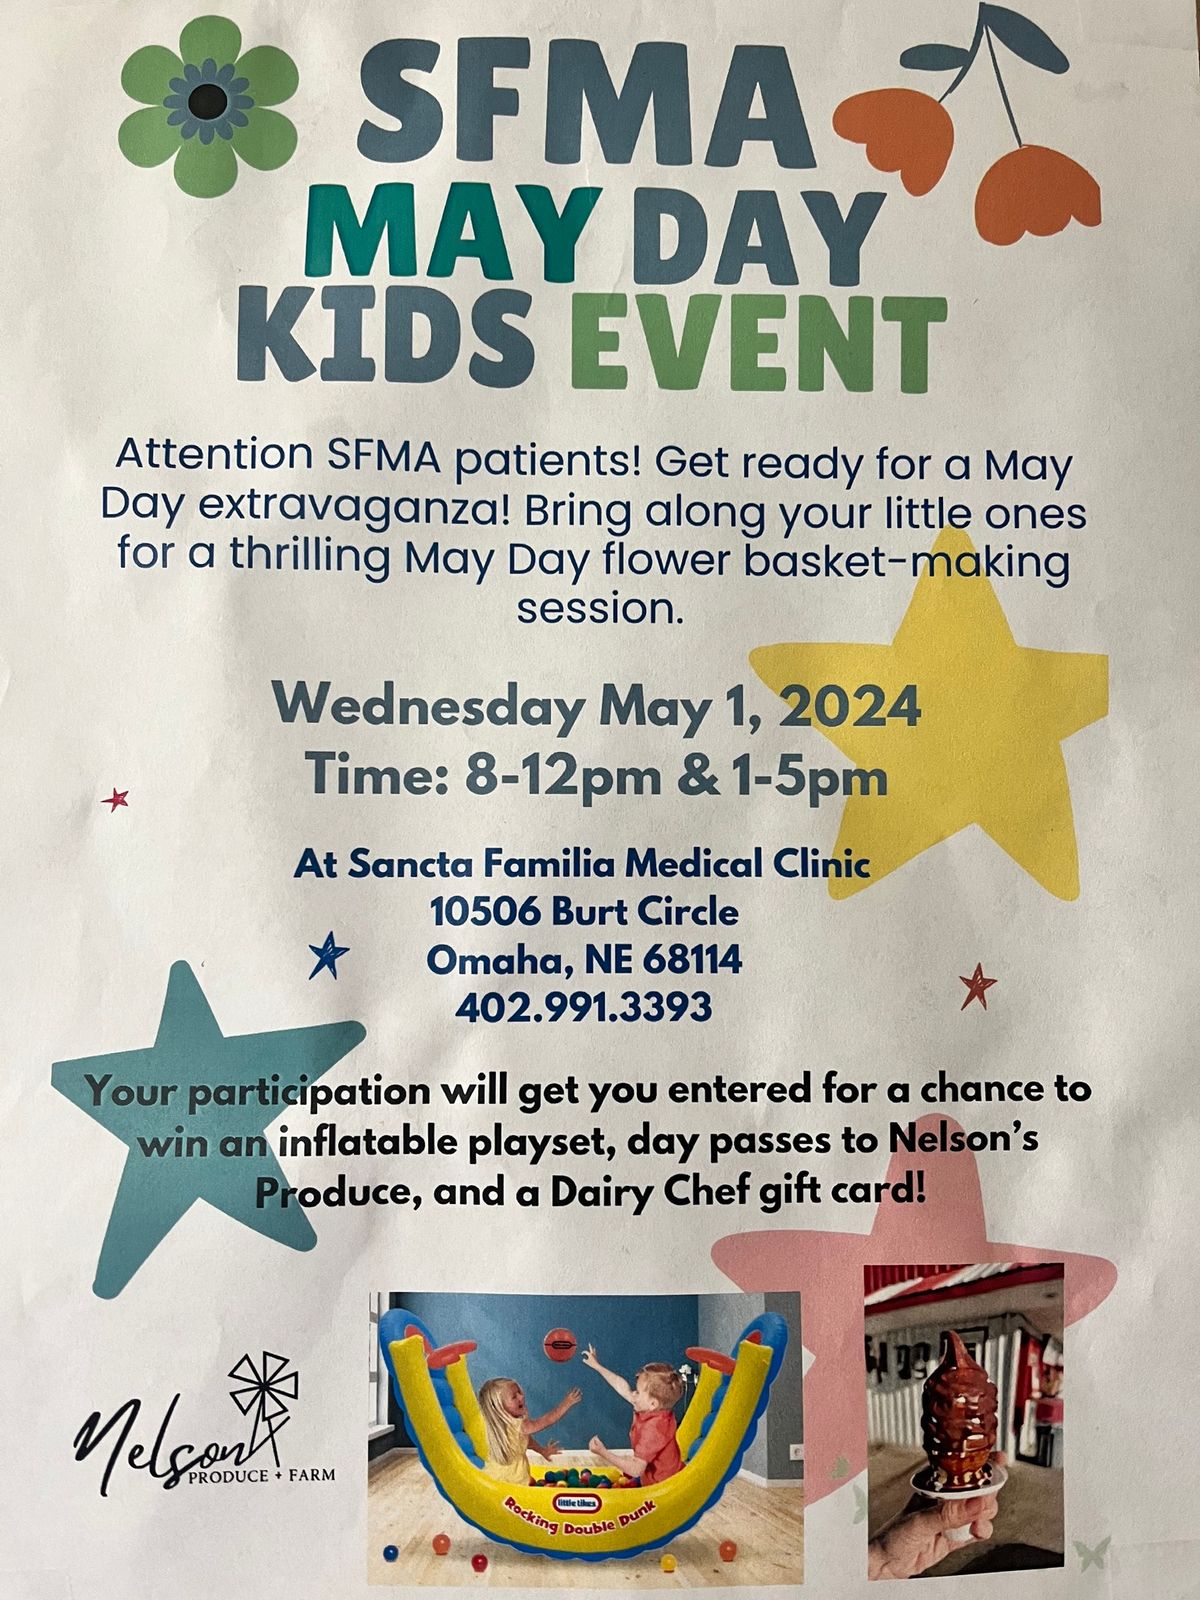 SFMA May Day Kids Event